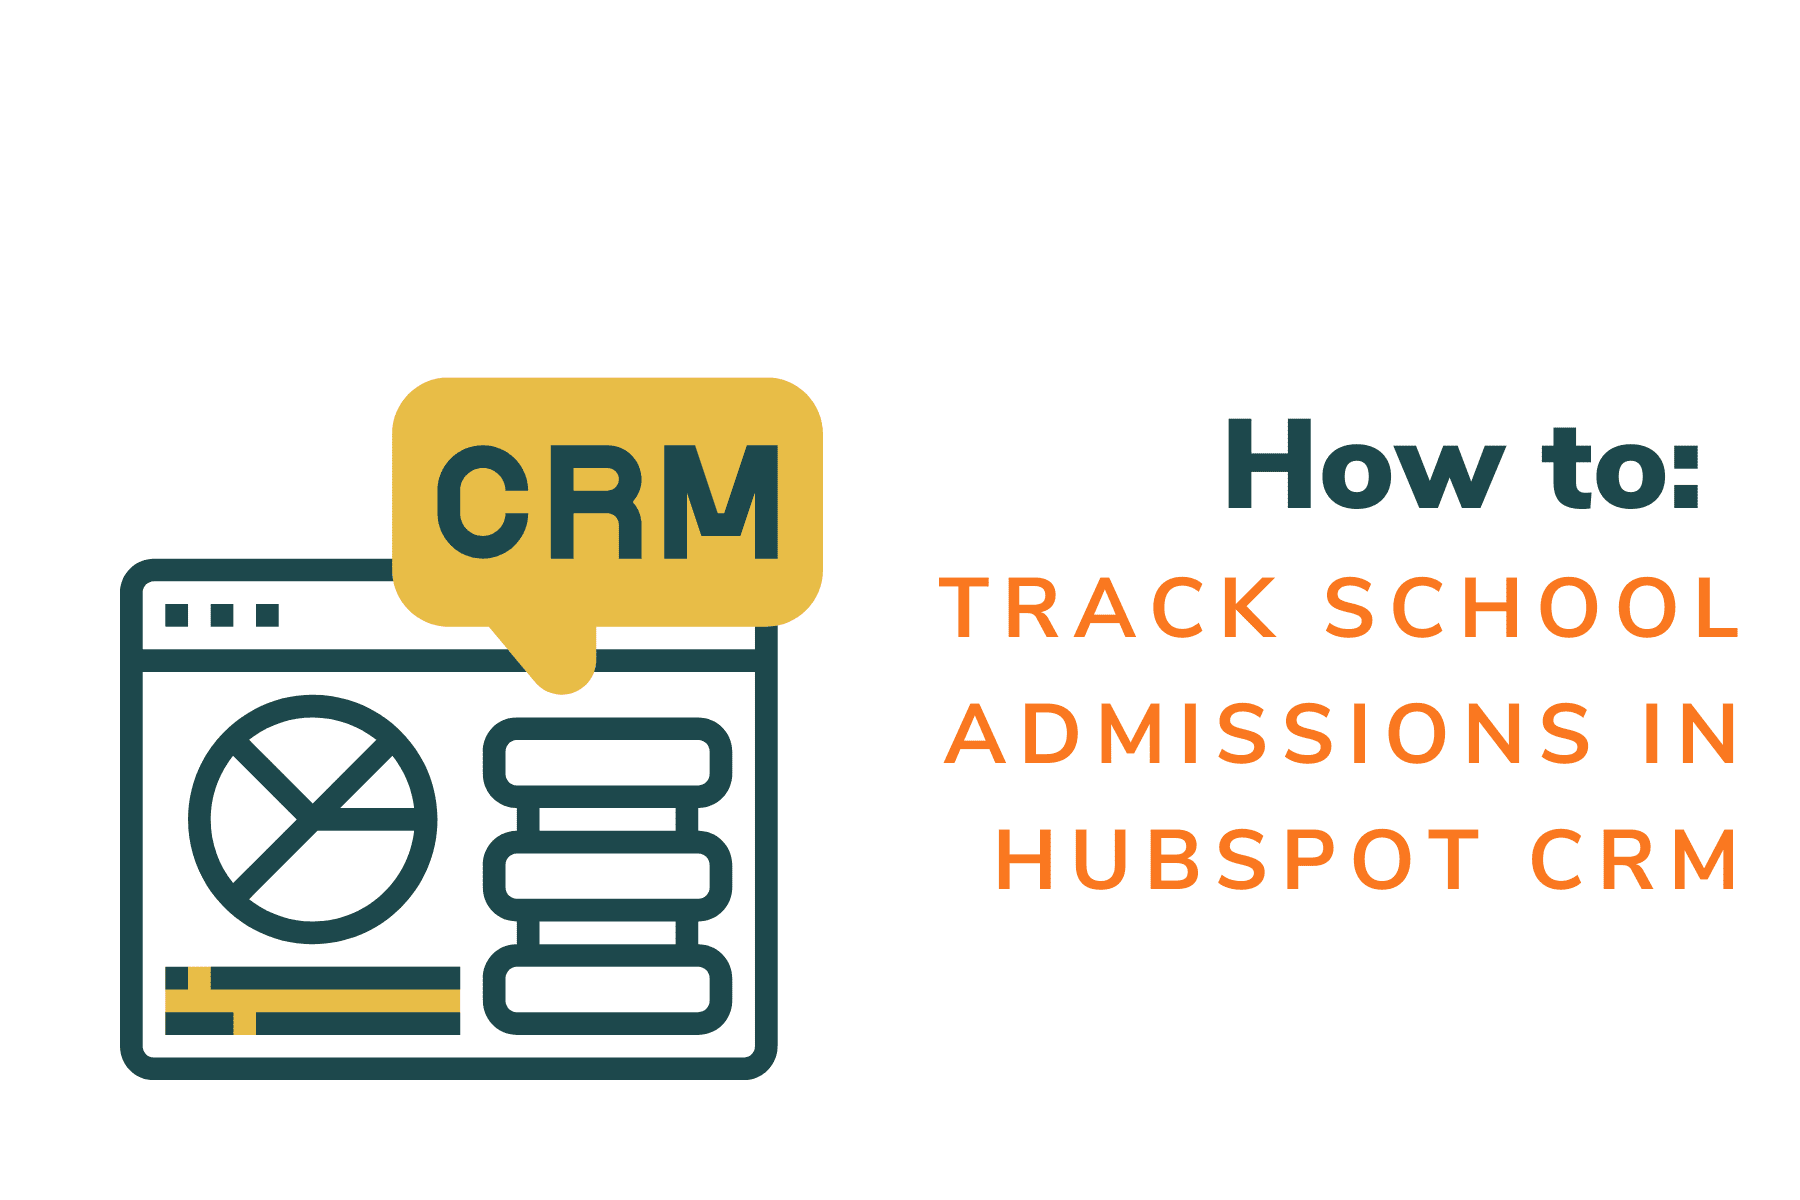 How to track school admissions in HubSpot CRM